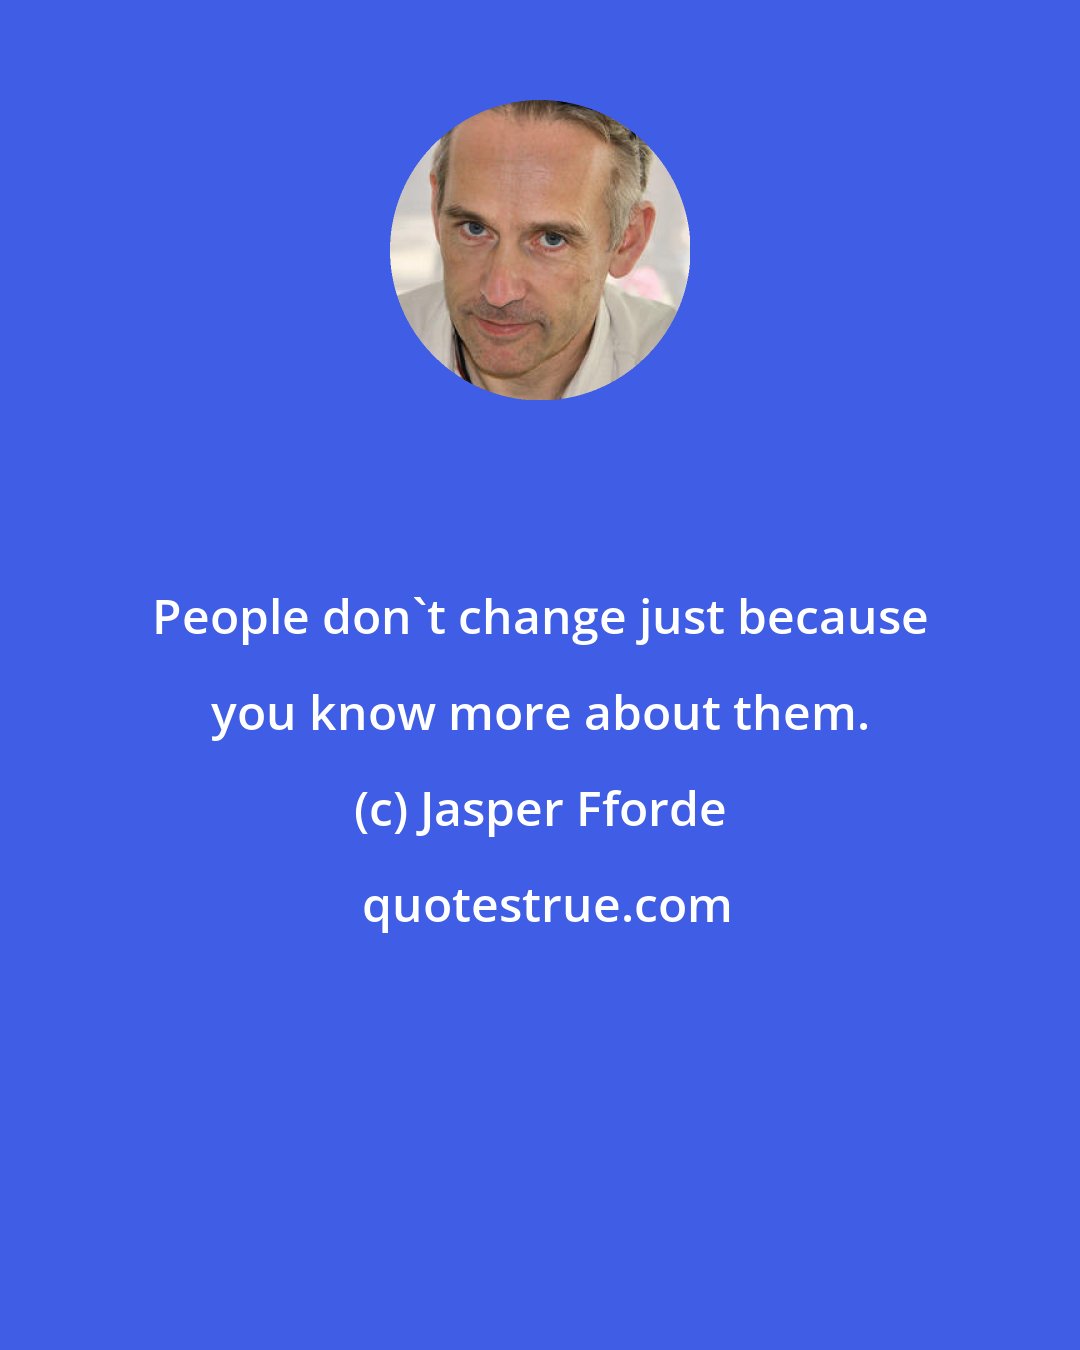 Jasper Fforde: People don't change just because you know more about them.